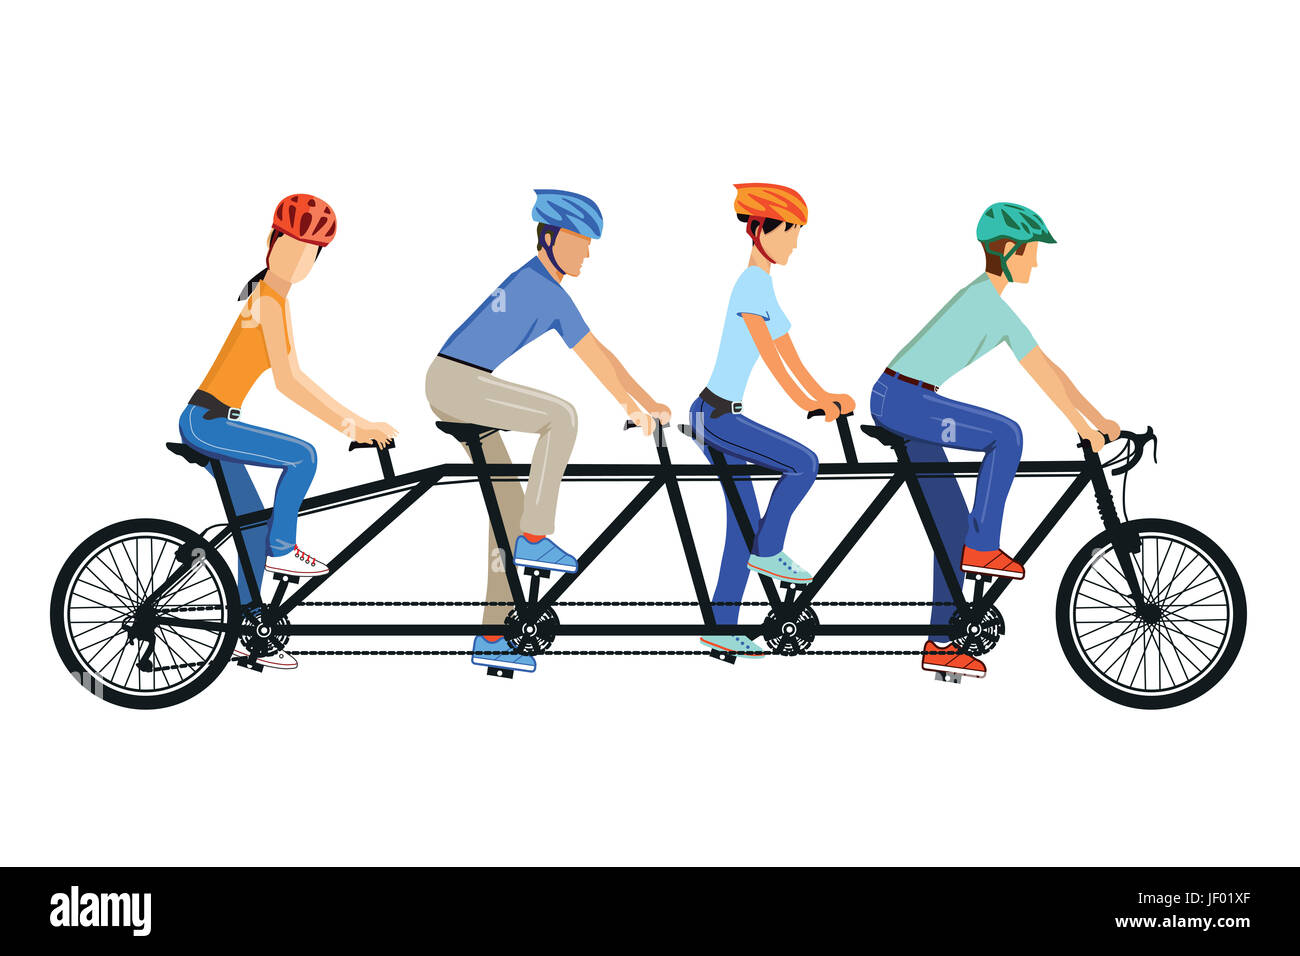 Cycling Tandem Bicycle Stock Photo